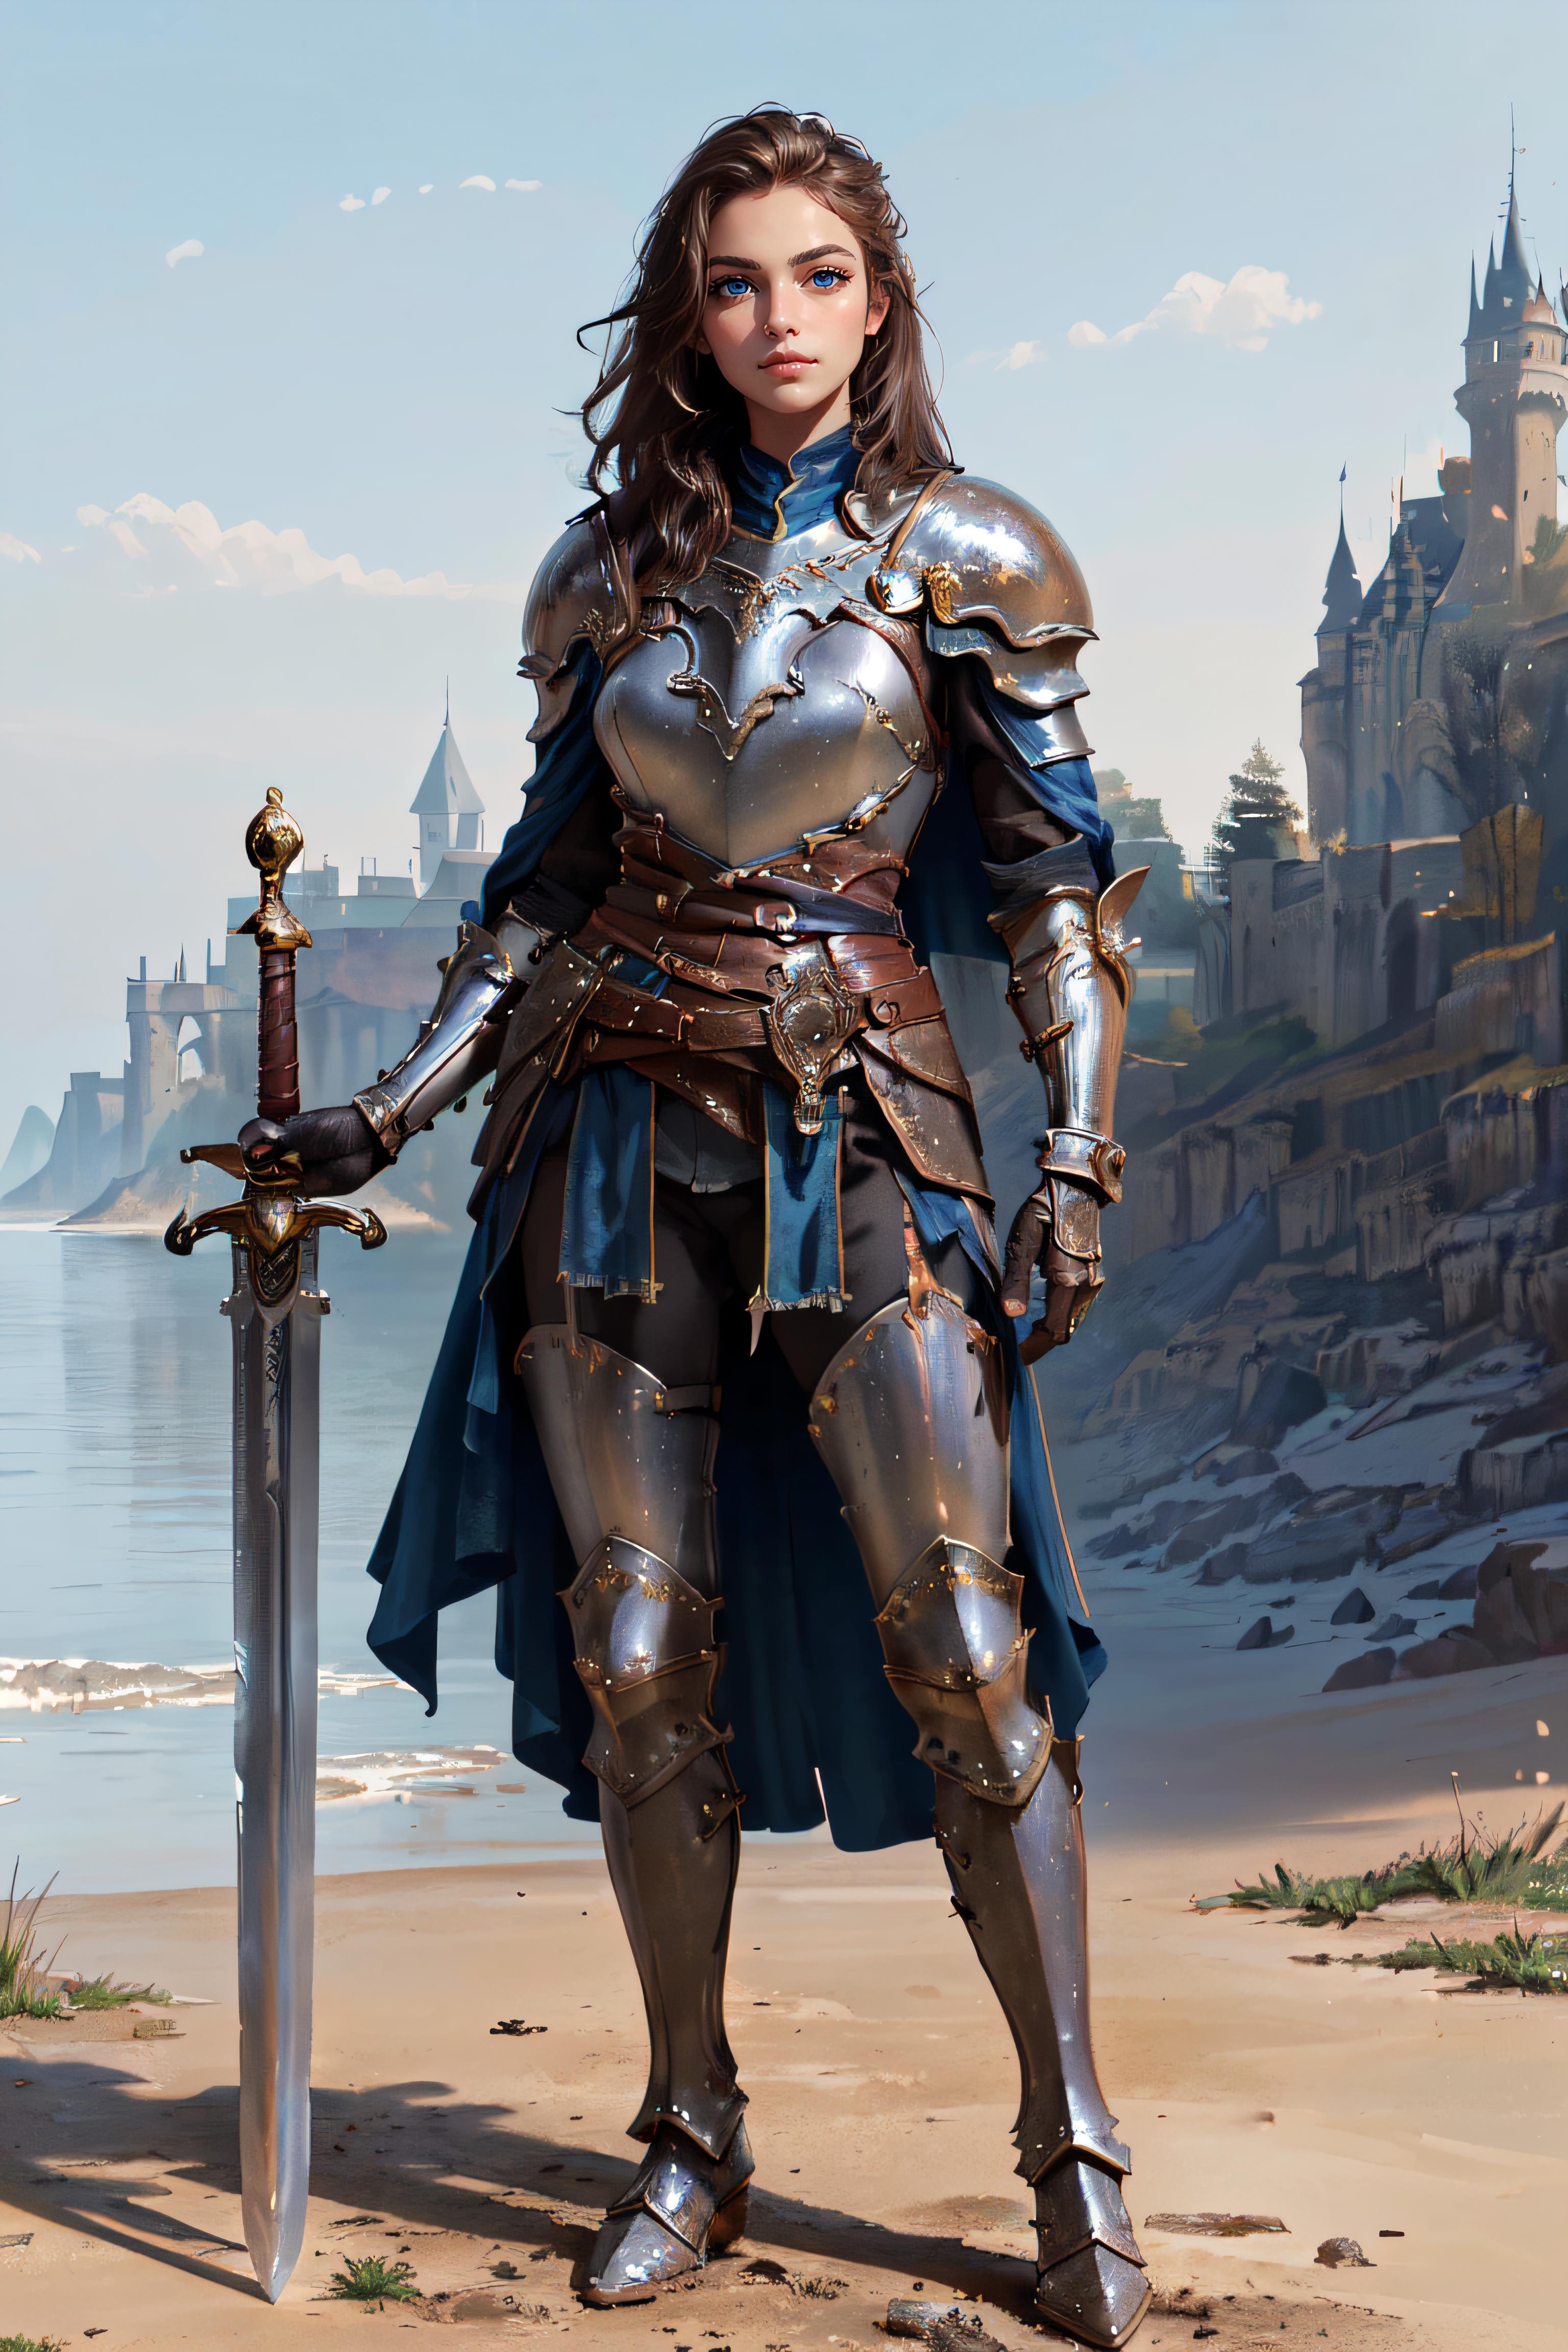 Female knight with holding a sword(reverse grip) image by betweenspectrums